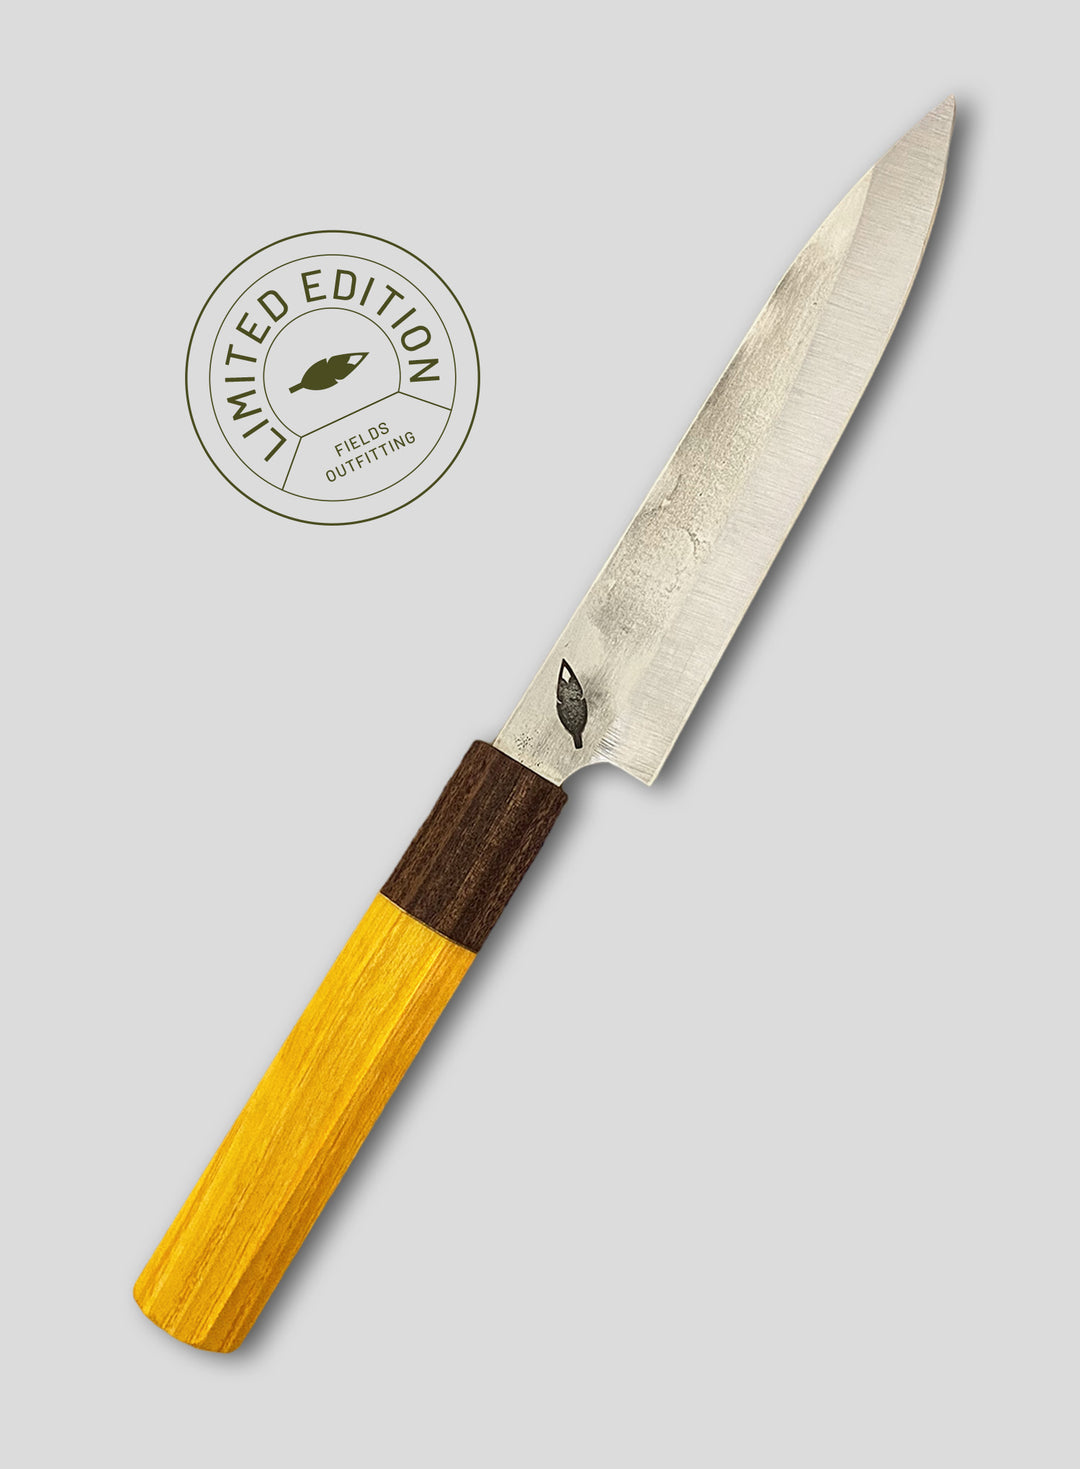 Limited Edition Enojito (Mulberry with Guayacan Handle)